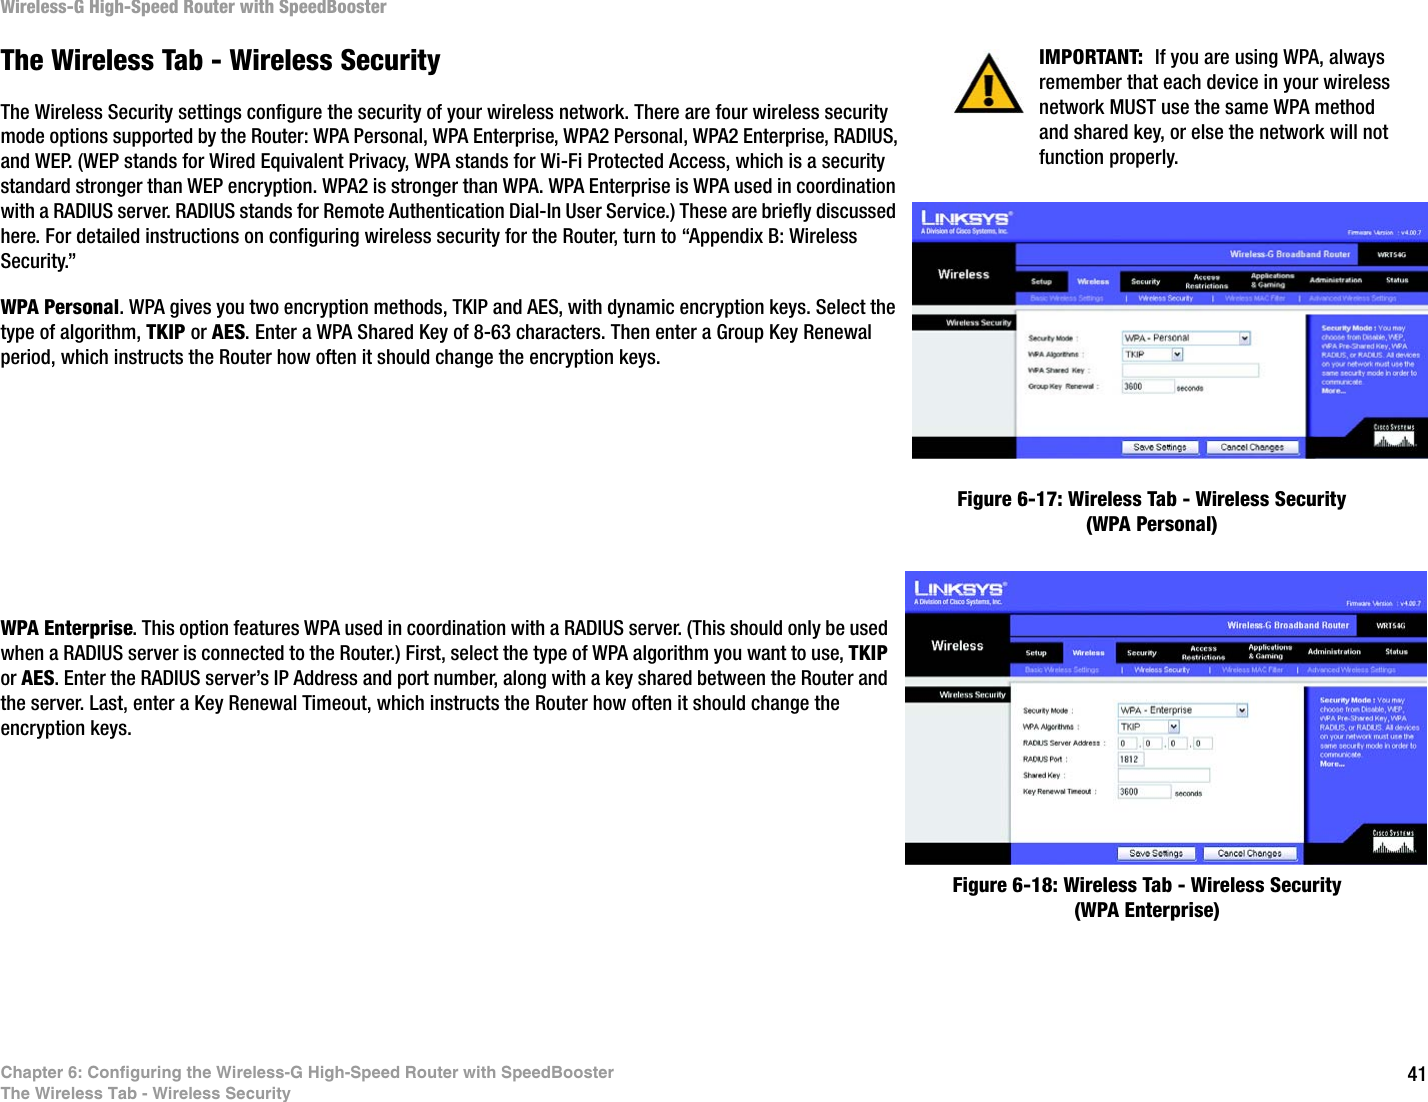 41Chapter 6: Configuring the Wireless-G High-Speed Router with SpeedBoosterThe Wireless Tab - Wireless SecurityWireless-G High-Speed Router with SpeedBoosterThe Wireless Tab - Wireless SecurityThe Wireless Security settings configure the security of your wireless network. There are four wireless security mode options supported by the Router: WPA Personal, WPA Enterprise, WPA2 Personal, WPA2 Enterprise, RADIUS, and WEP. (WEP stands for Wired Equivalent Privacy, WPA stands for Wi-Fi Protected Access, which is a security standard stronger than WEP encryption. WPA2 is stronger than WPA. WPA Enterprise is WPA used in coordination with a RADIUS server. RADIUS stands for Remote Authentication Dial-In User Service.) These are briefly discussed here. For detailed instructions on configuring wireless security for the Router, turn to “Appendix B: Wireless Security.”WPA Personal. WPA gives you two encryption methods, TKIP and AES, with dynamic encryption keys. Select the type of algorithm, TKIP or AES. Enter a WPA Shared Key of 8-63 characters. Then enter a Group Key Renewal period, which instructs the Router how often it should change the encryption keys.WPA Enterprise. This option features WPA used in coordination with a RADIUS server. (This should only be used when a RADIUS server is connected to the Router.) First, select the type of WPA algorithm you want to use, TKIP or AES. Enter the RADIUS server’s IP Address and port number, along with a key shared between the Router and the server. Last, enter a Key Renewal Timeout, which instructs the Router how often it should change the encryption keys.Figure 6-17: Wireless Tab - Wireless Security (WPA Personal)Figure 6-18: Wireless Tab - Wireless Security (WPA Enterprise)IMPORTANT:  If you are using WPA, always remember that each device in your wireless network MUST use the same WPA method and shared key, or else the network will not function properly.